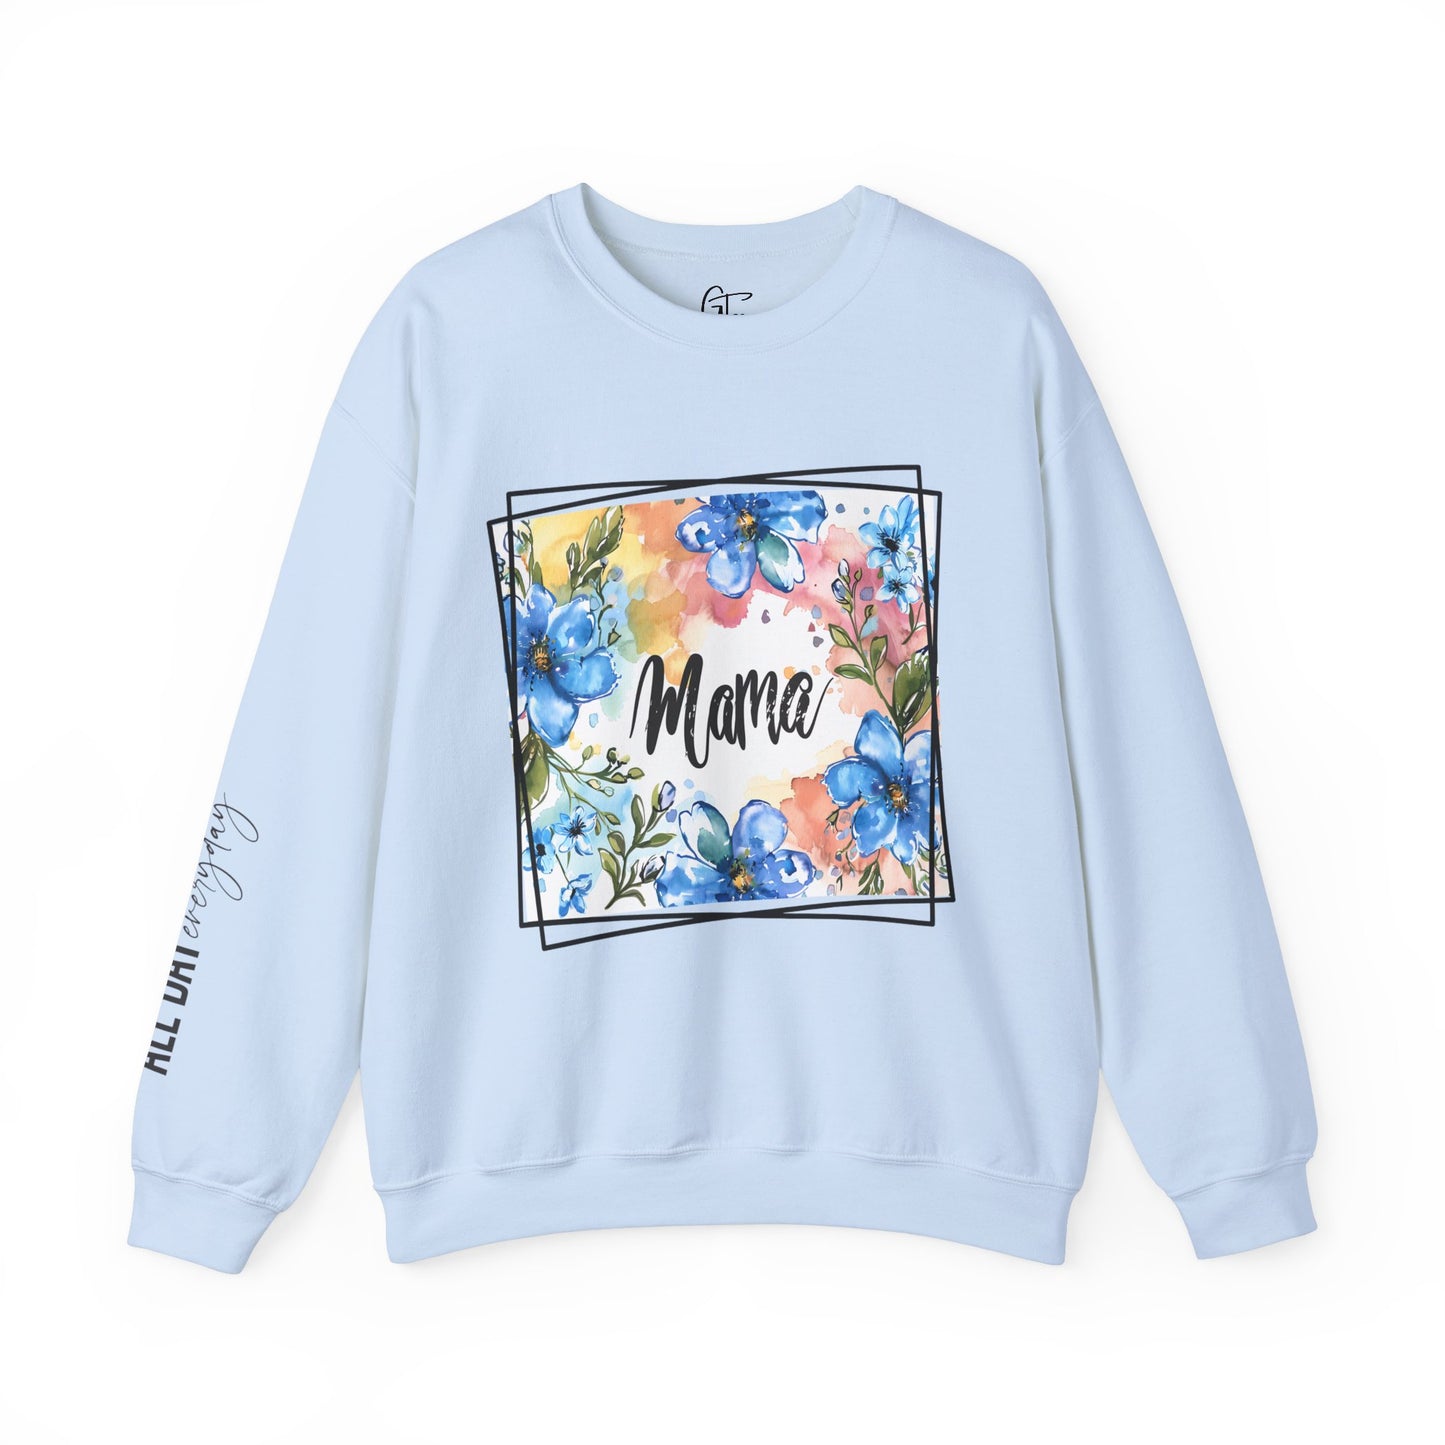 Colorful Flowers with Mama Sweatshirt All Day Everyday Sleeve